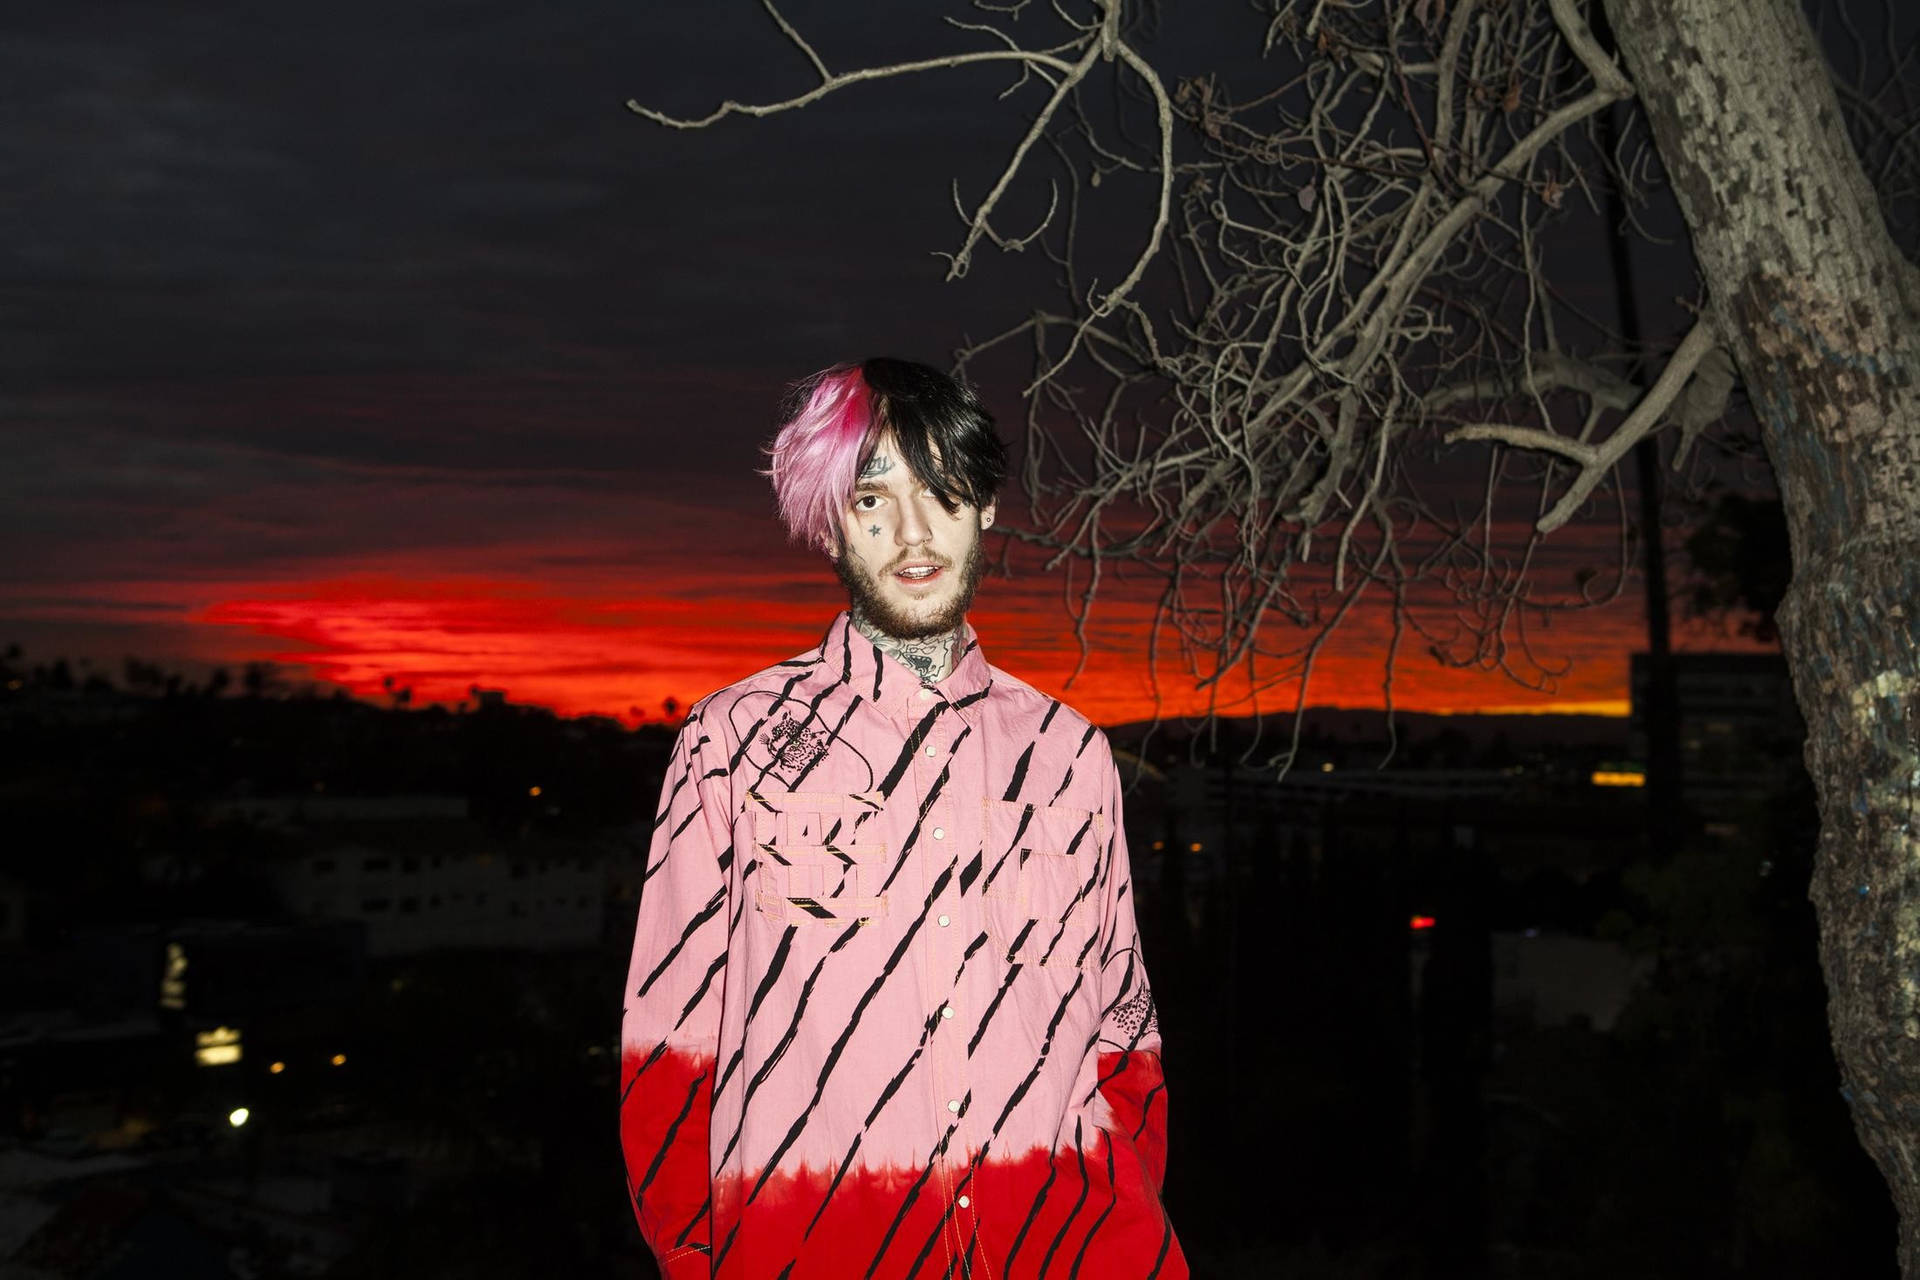 Lil Peep Looks Out Into The Horizon In A Beautiful Sunset